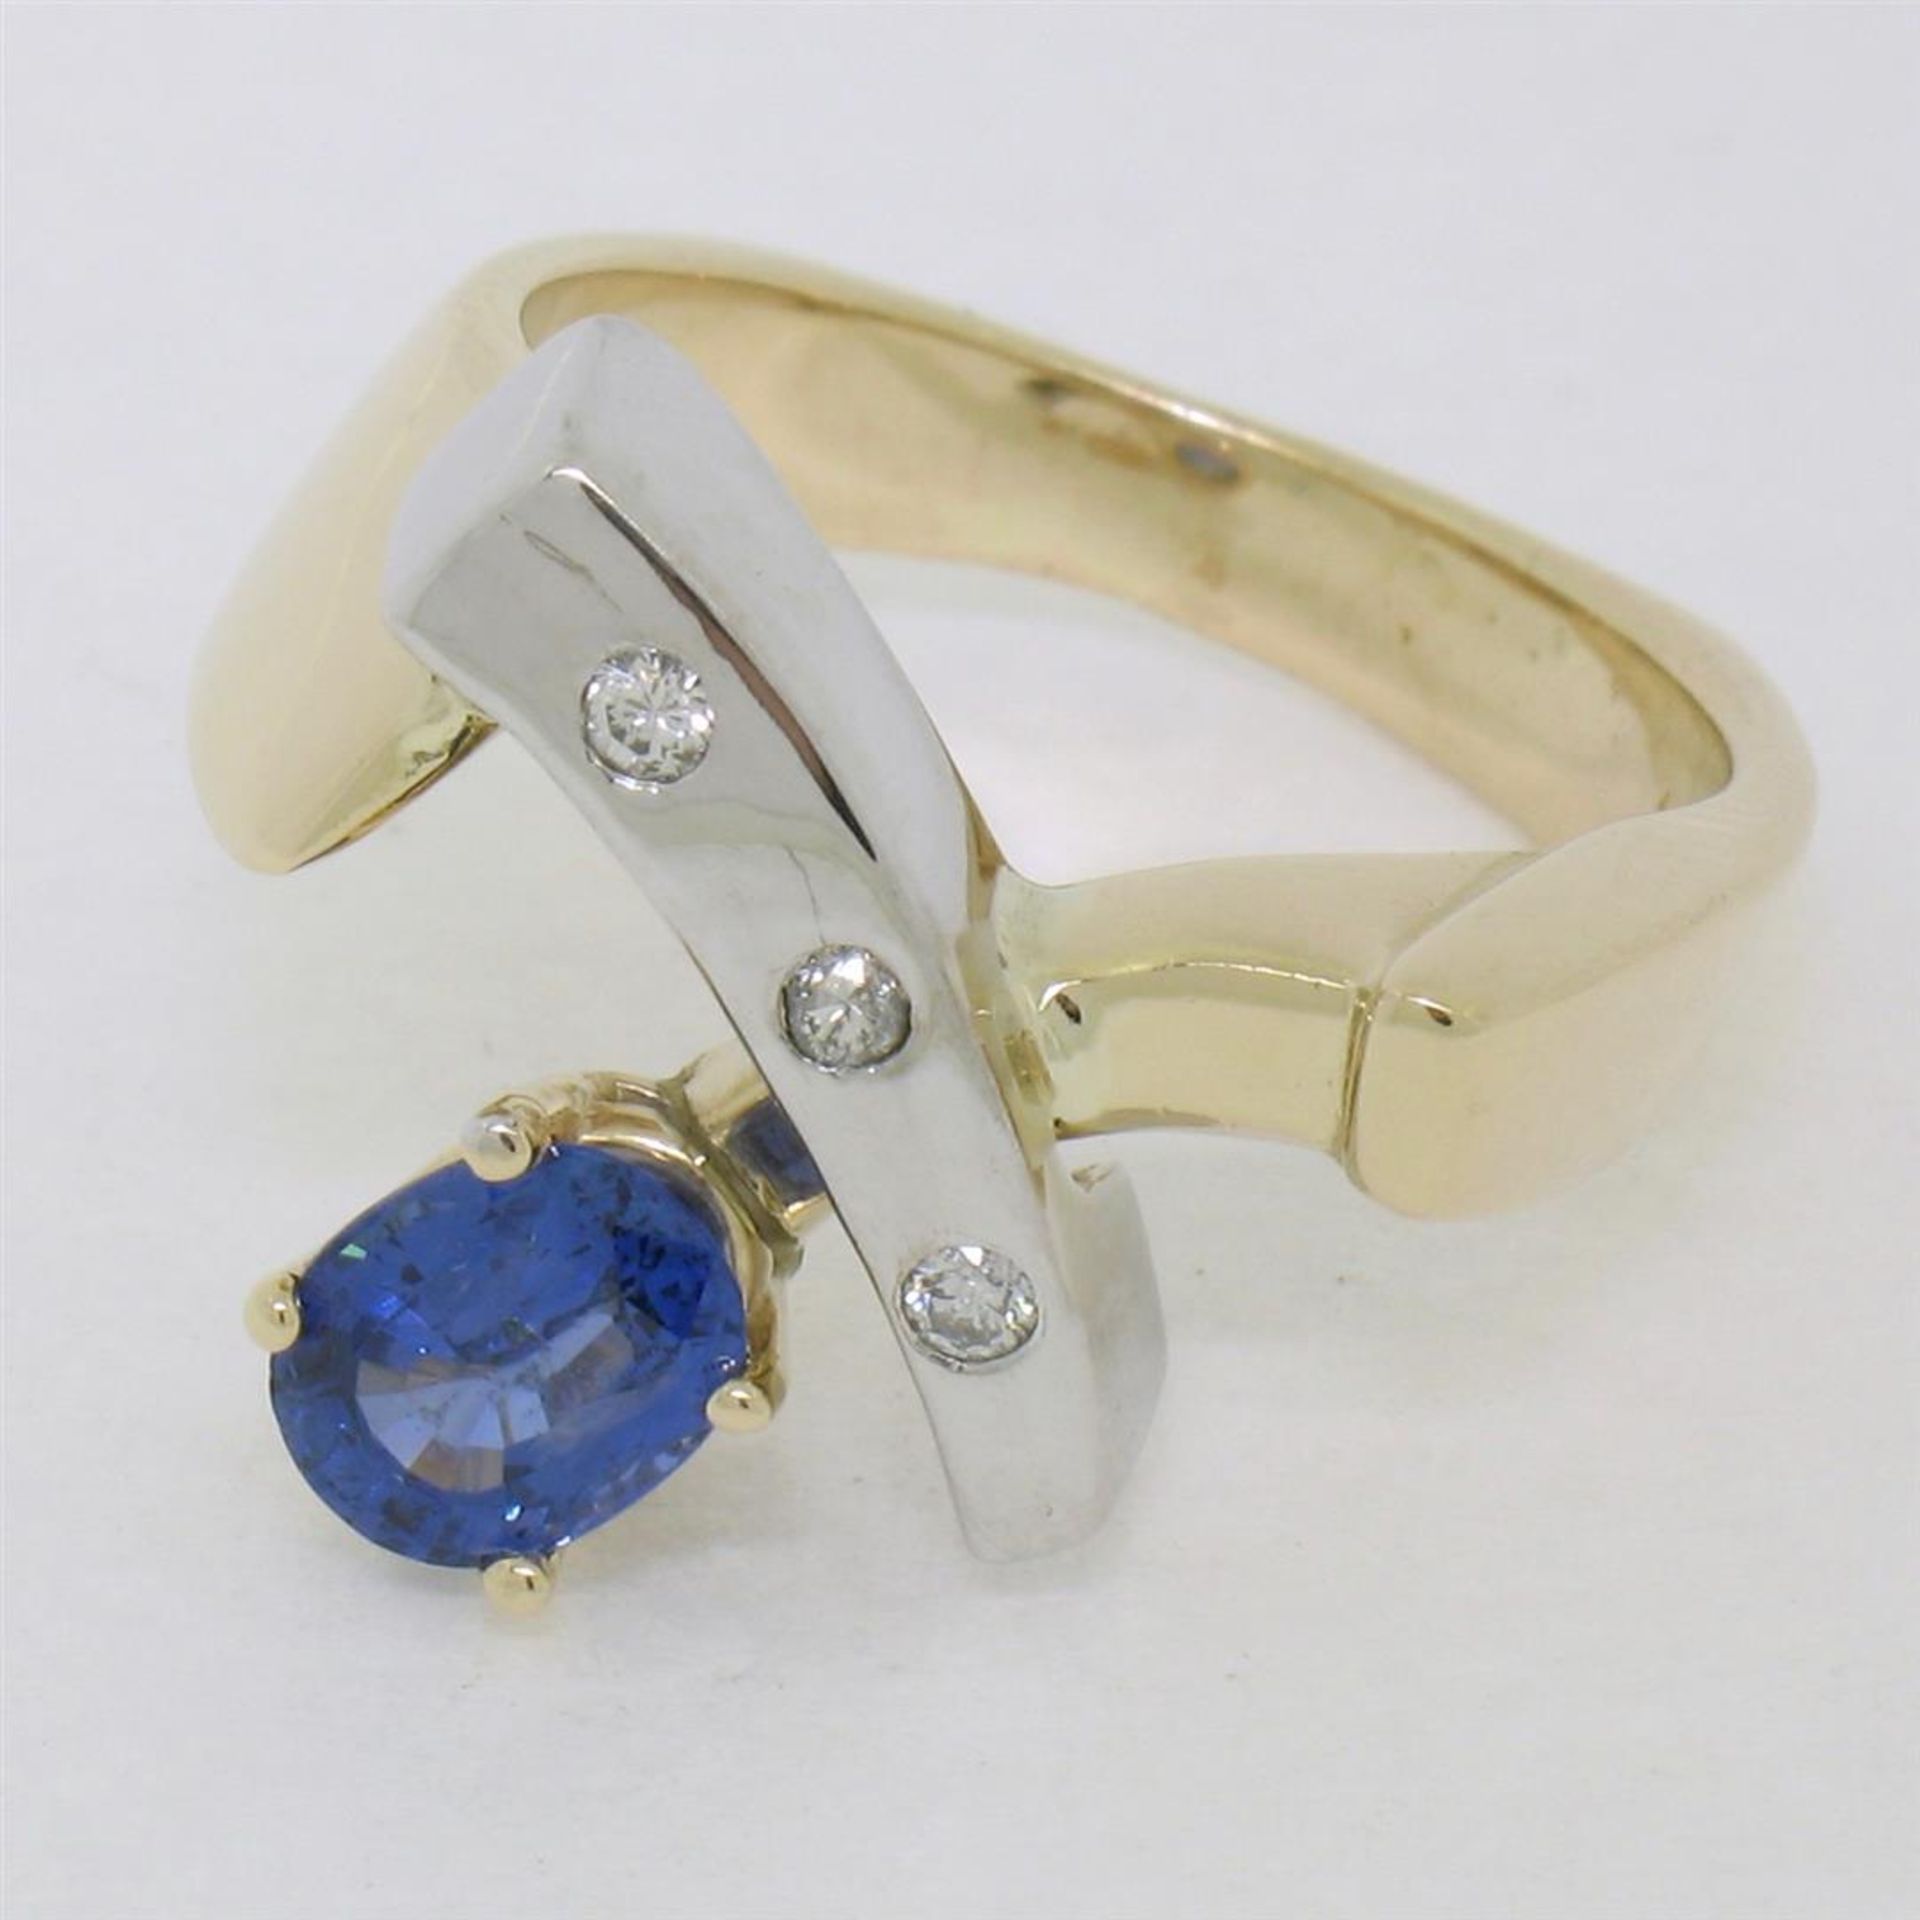 Two Tone 14K Gold 0.98ctw QUALITY Sapphire Solitaire Ring w/ 3 Diamond Accents